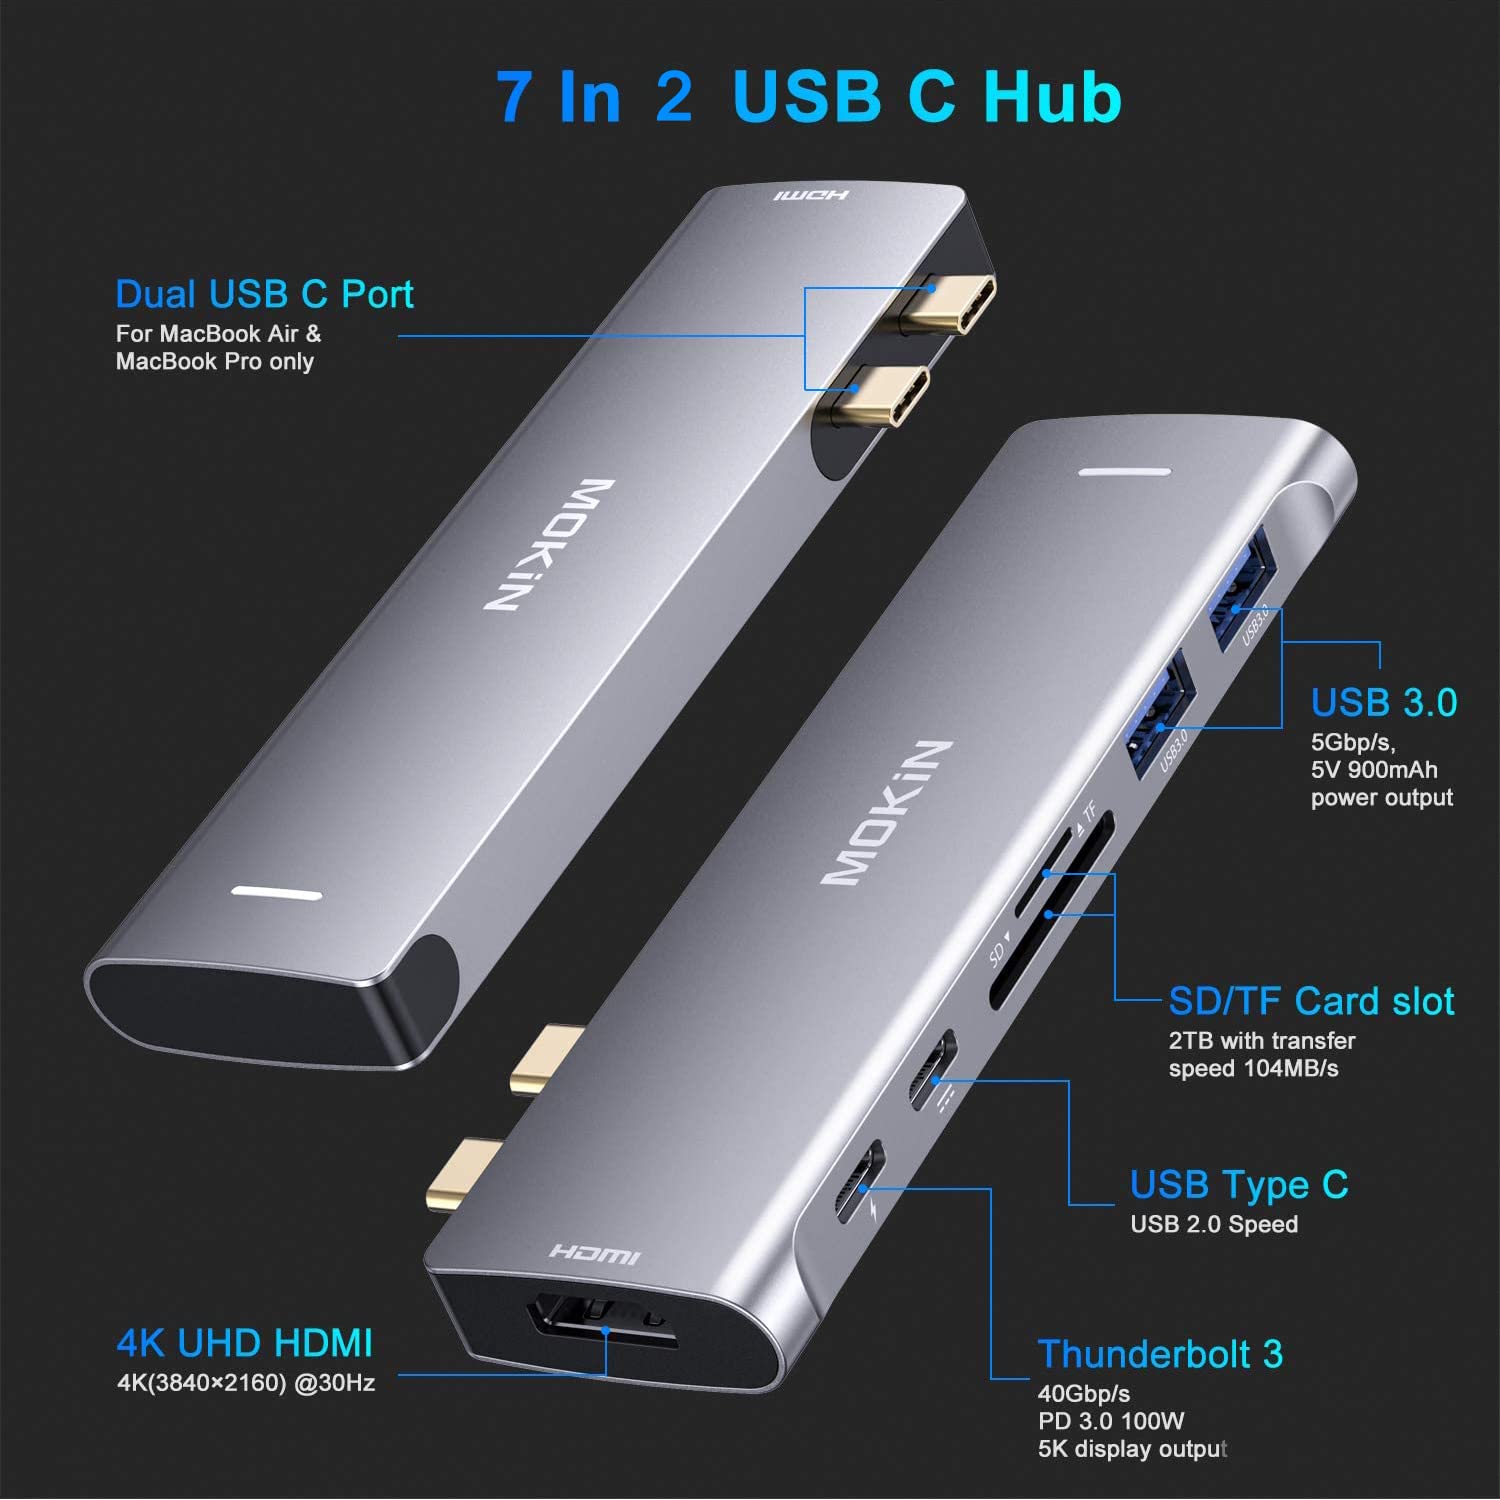 USB C Adapter for MacBook Pro 2022 2021 2020, MacBook Pro USB Adapter, 7 in 2 MacBook Pro Accessories for MacBook Pro/Air M1M2, Mac Dongle with 4K HDMI, 2 USB 3.0, TF/SD, USB-C 100W and Thunderbolt 3